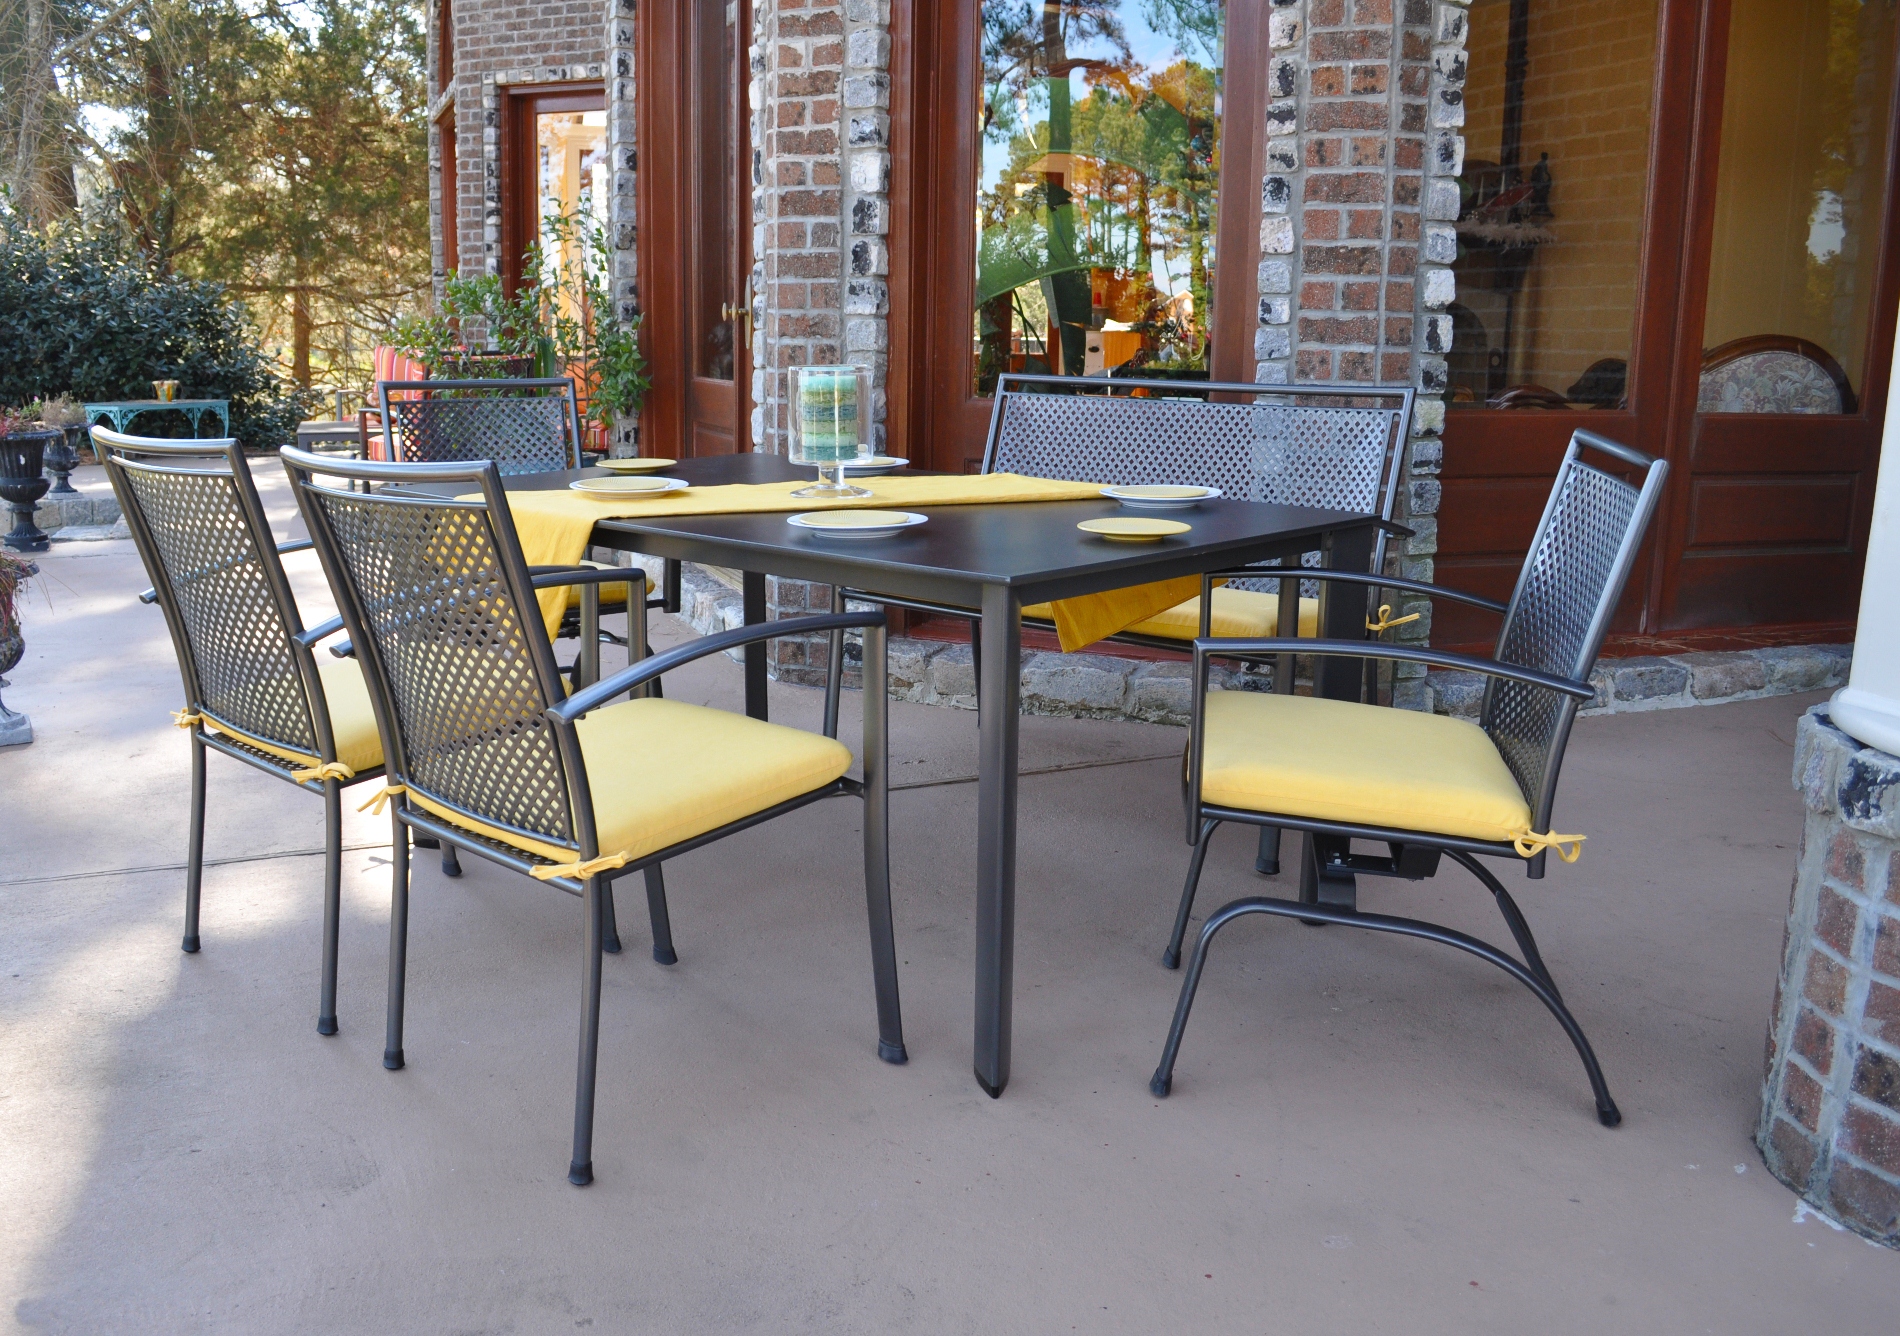 Reno Collection - Commercial Outdoor Furniture at Low Prices! Resort